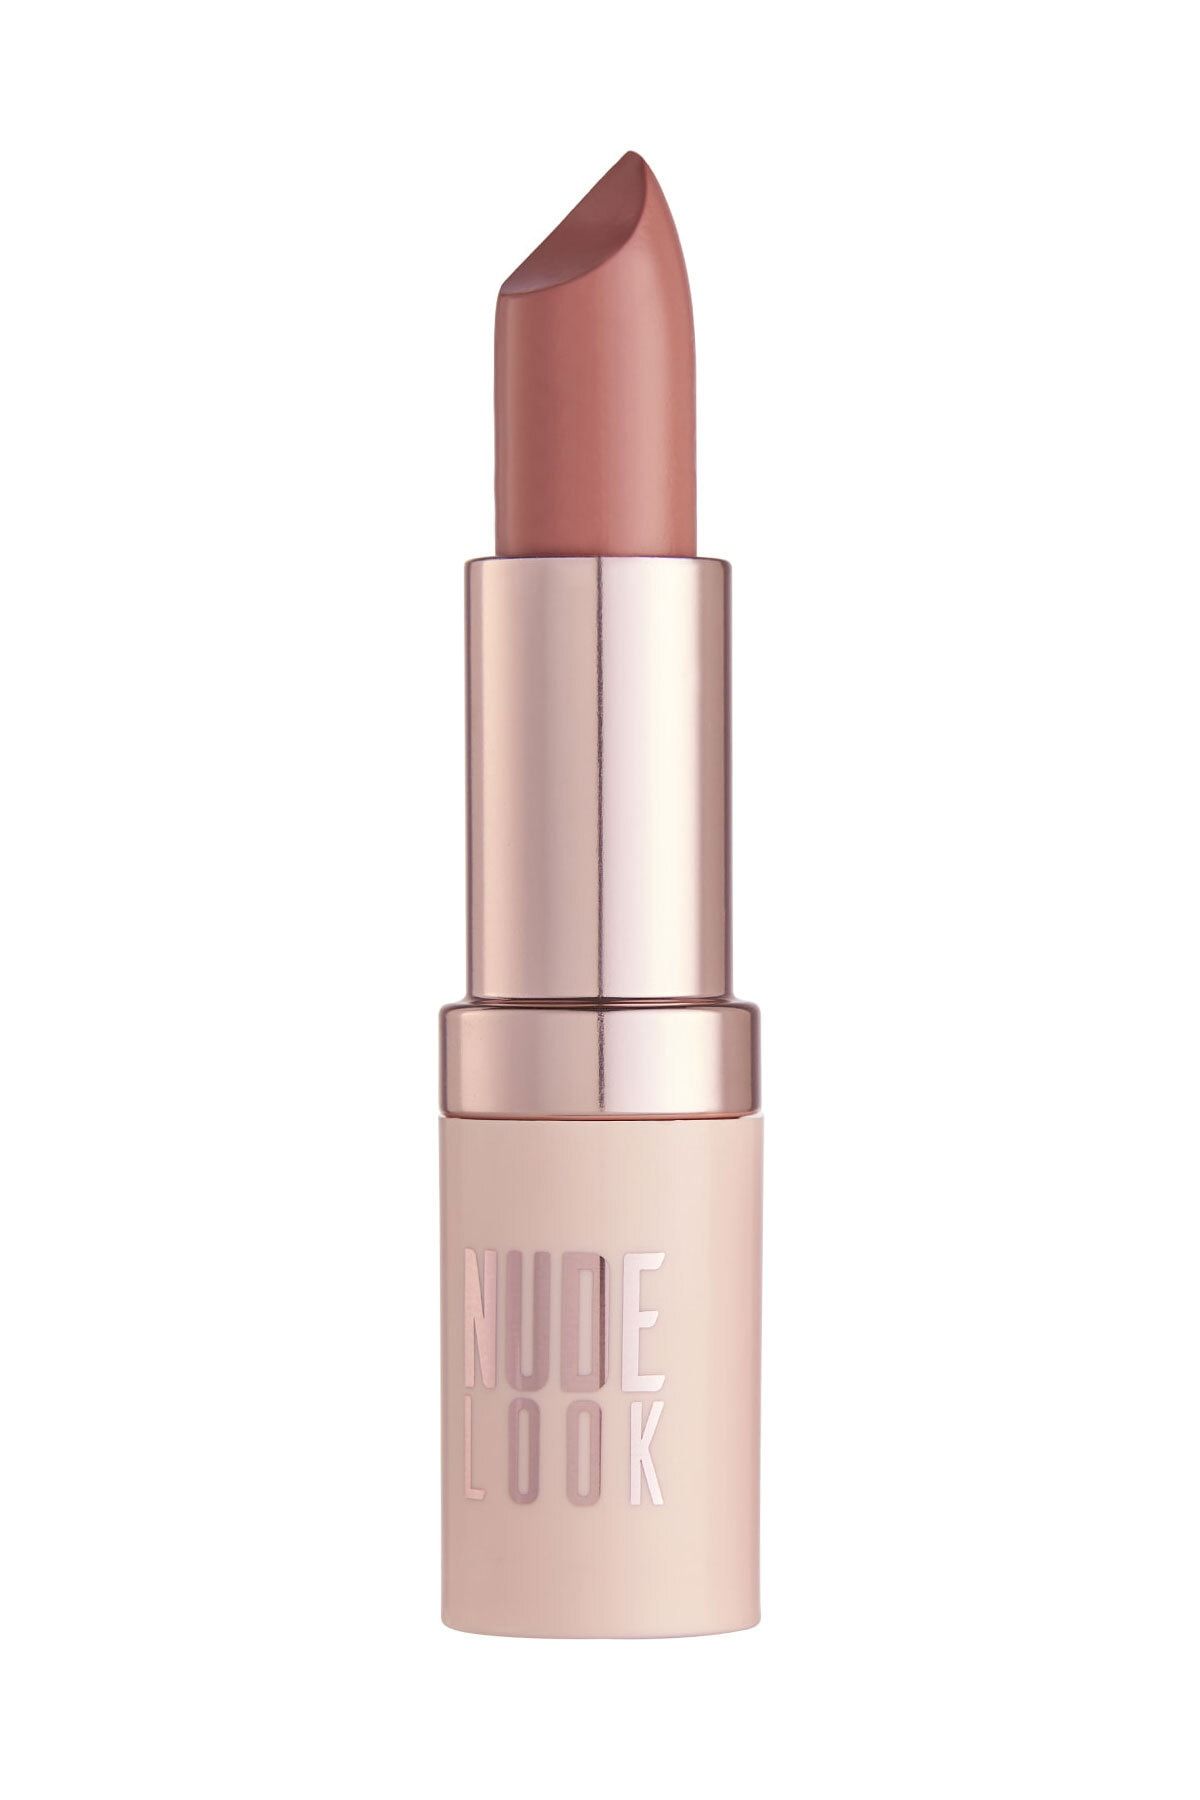 Golden Rose Nude Look Perfect Matte Lipstick No: 01 Coral Nude - Mat Ruj